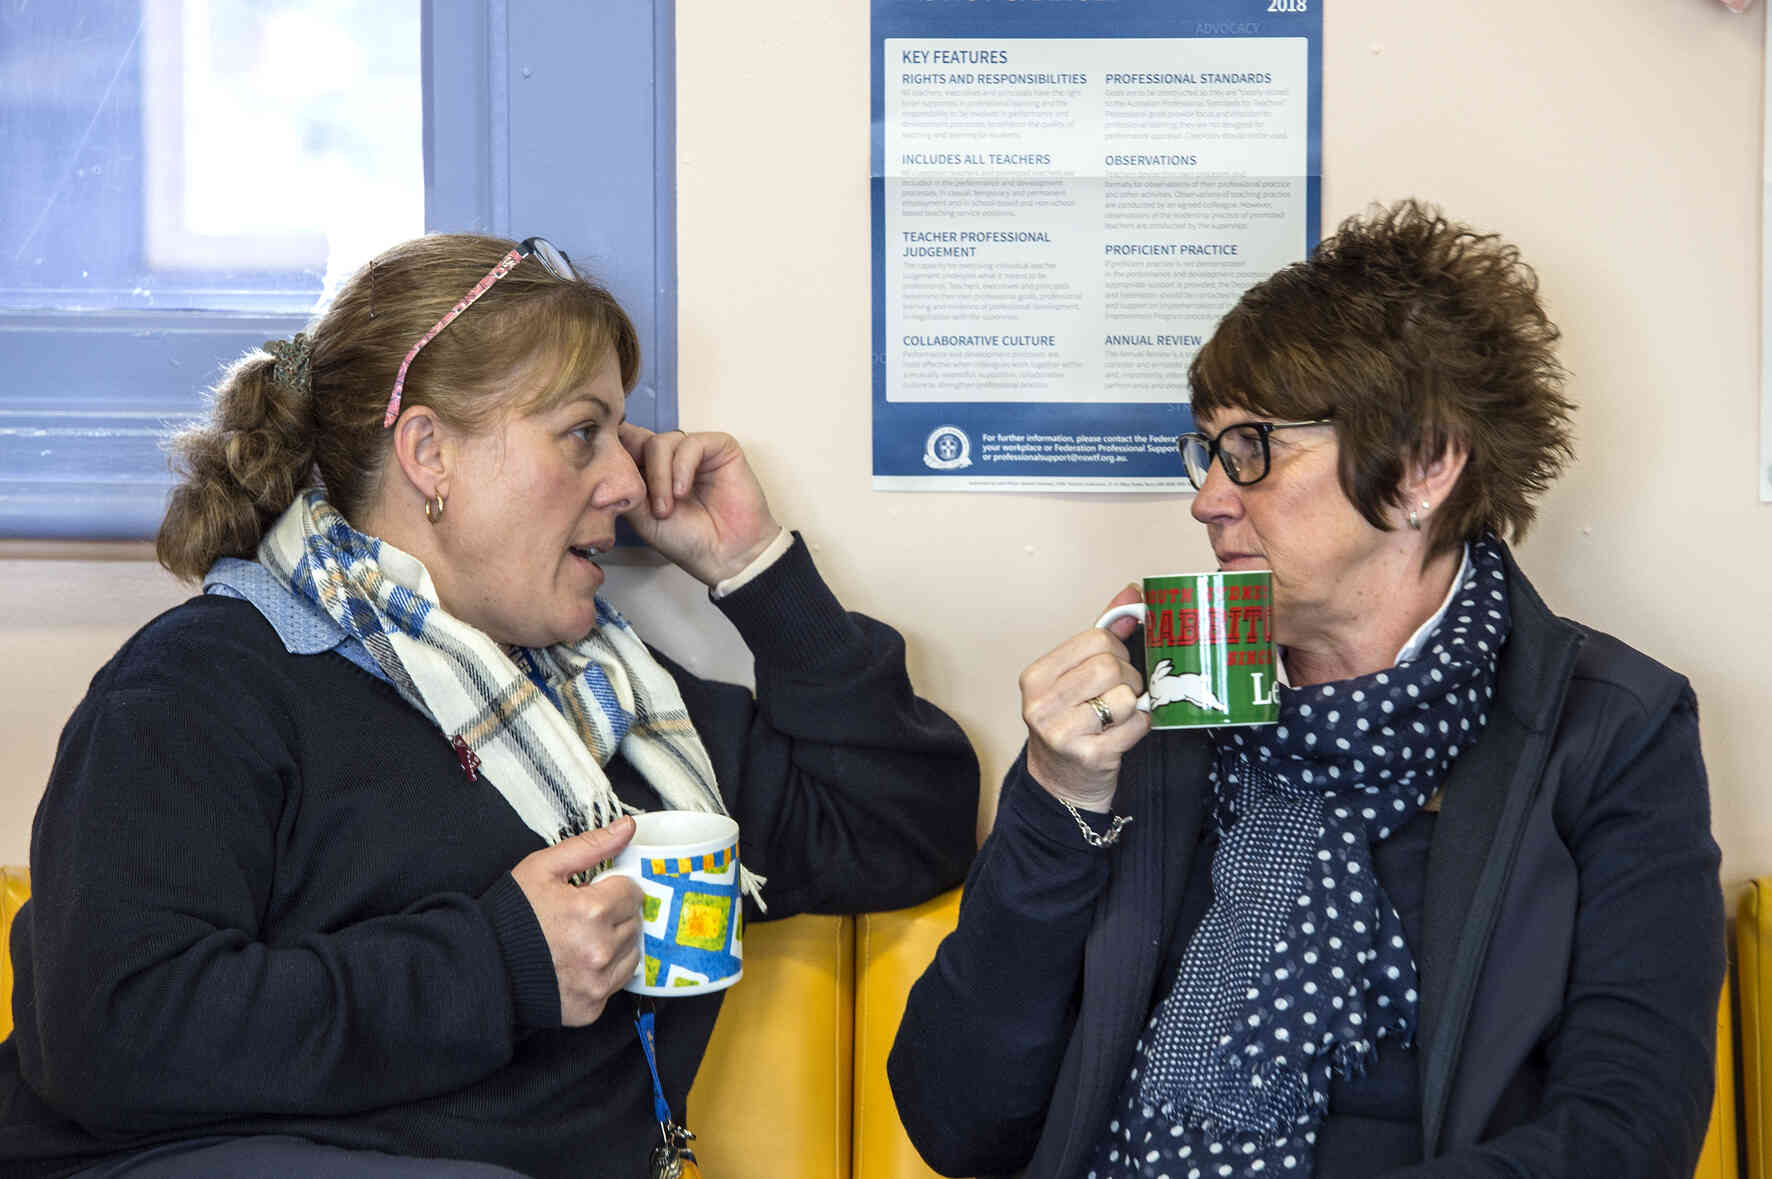 Two educators drinking tea, engaged in conversation